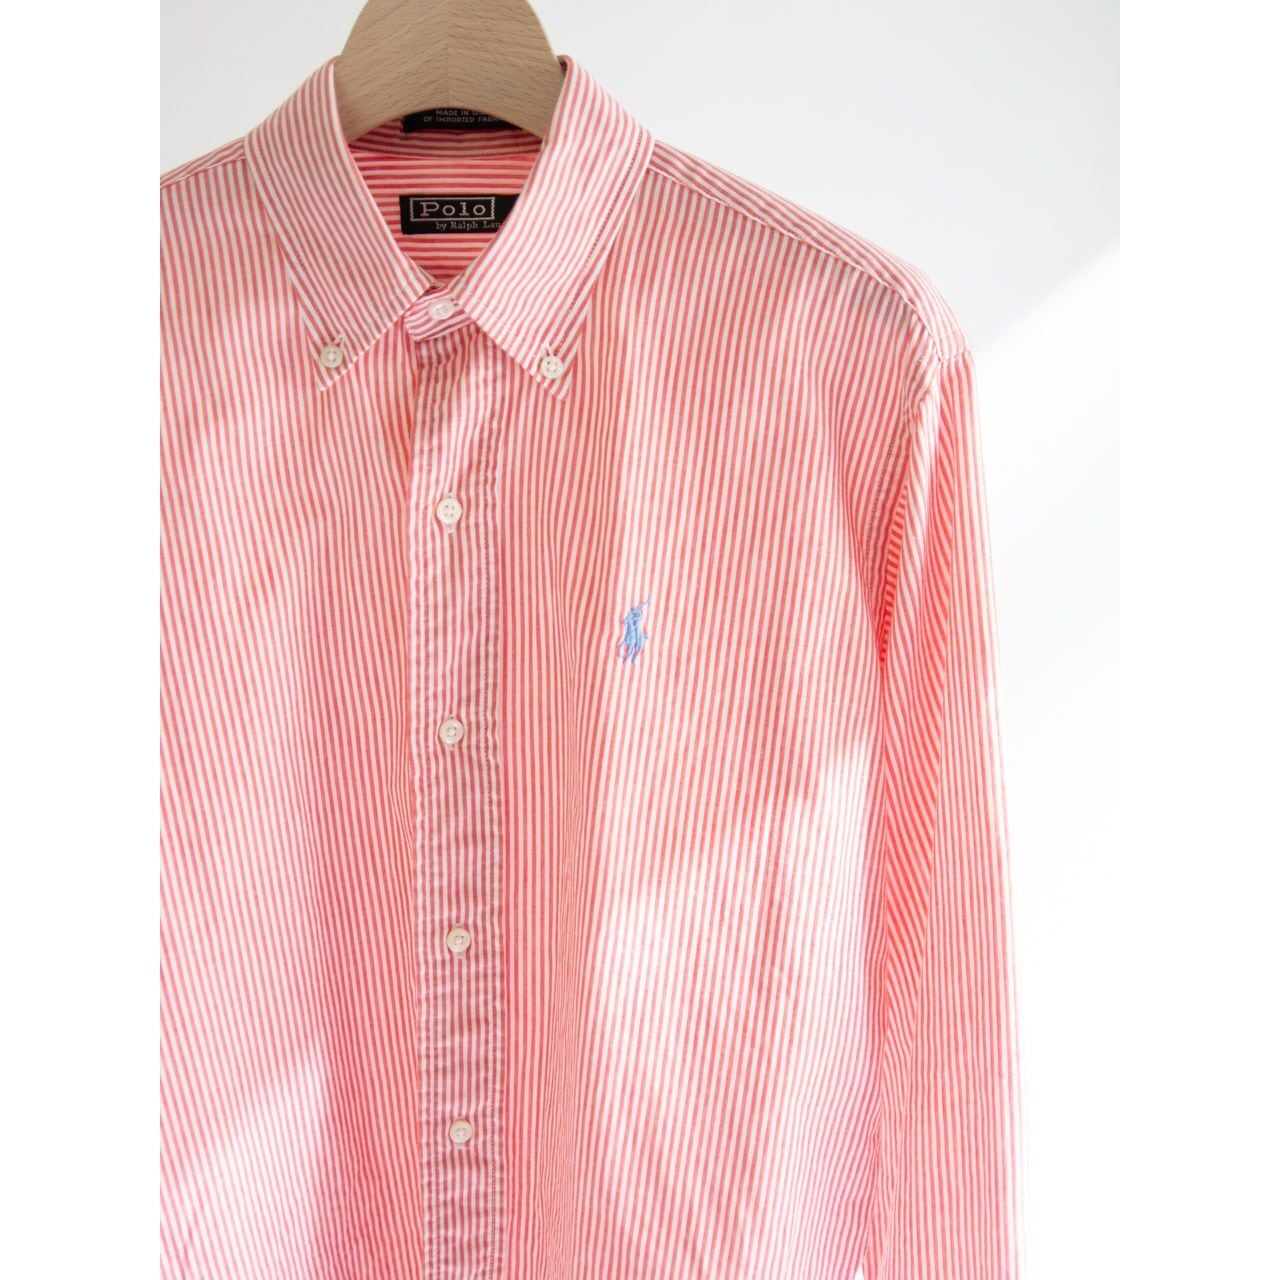 Polo by Ralph Lauren】Made in U.S.A. 80's 100% Cotton B.D. Stripe